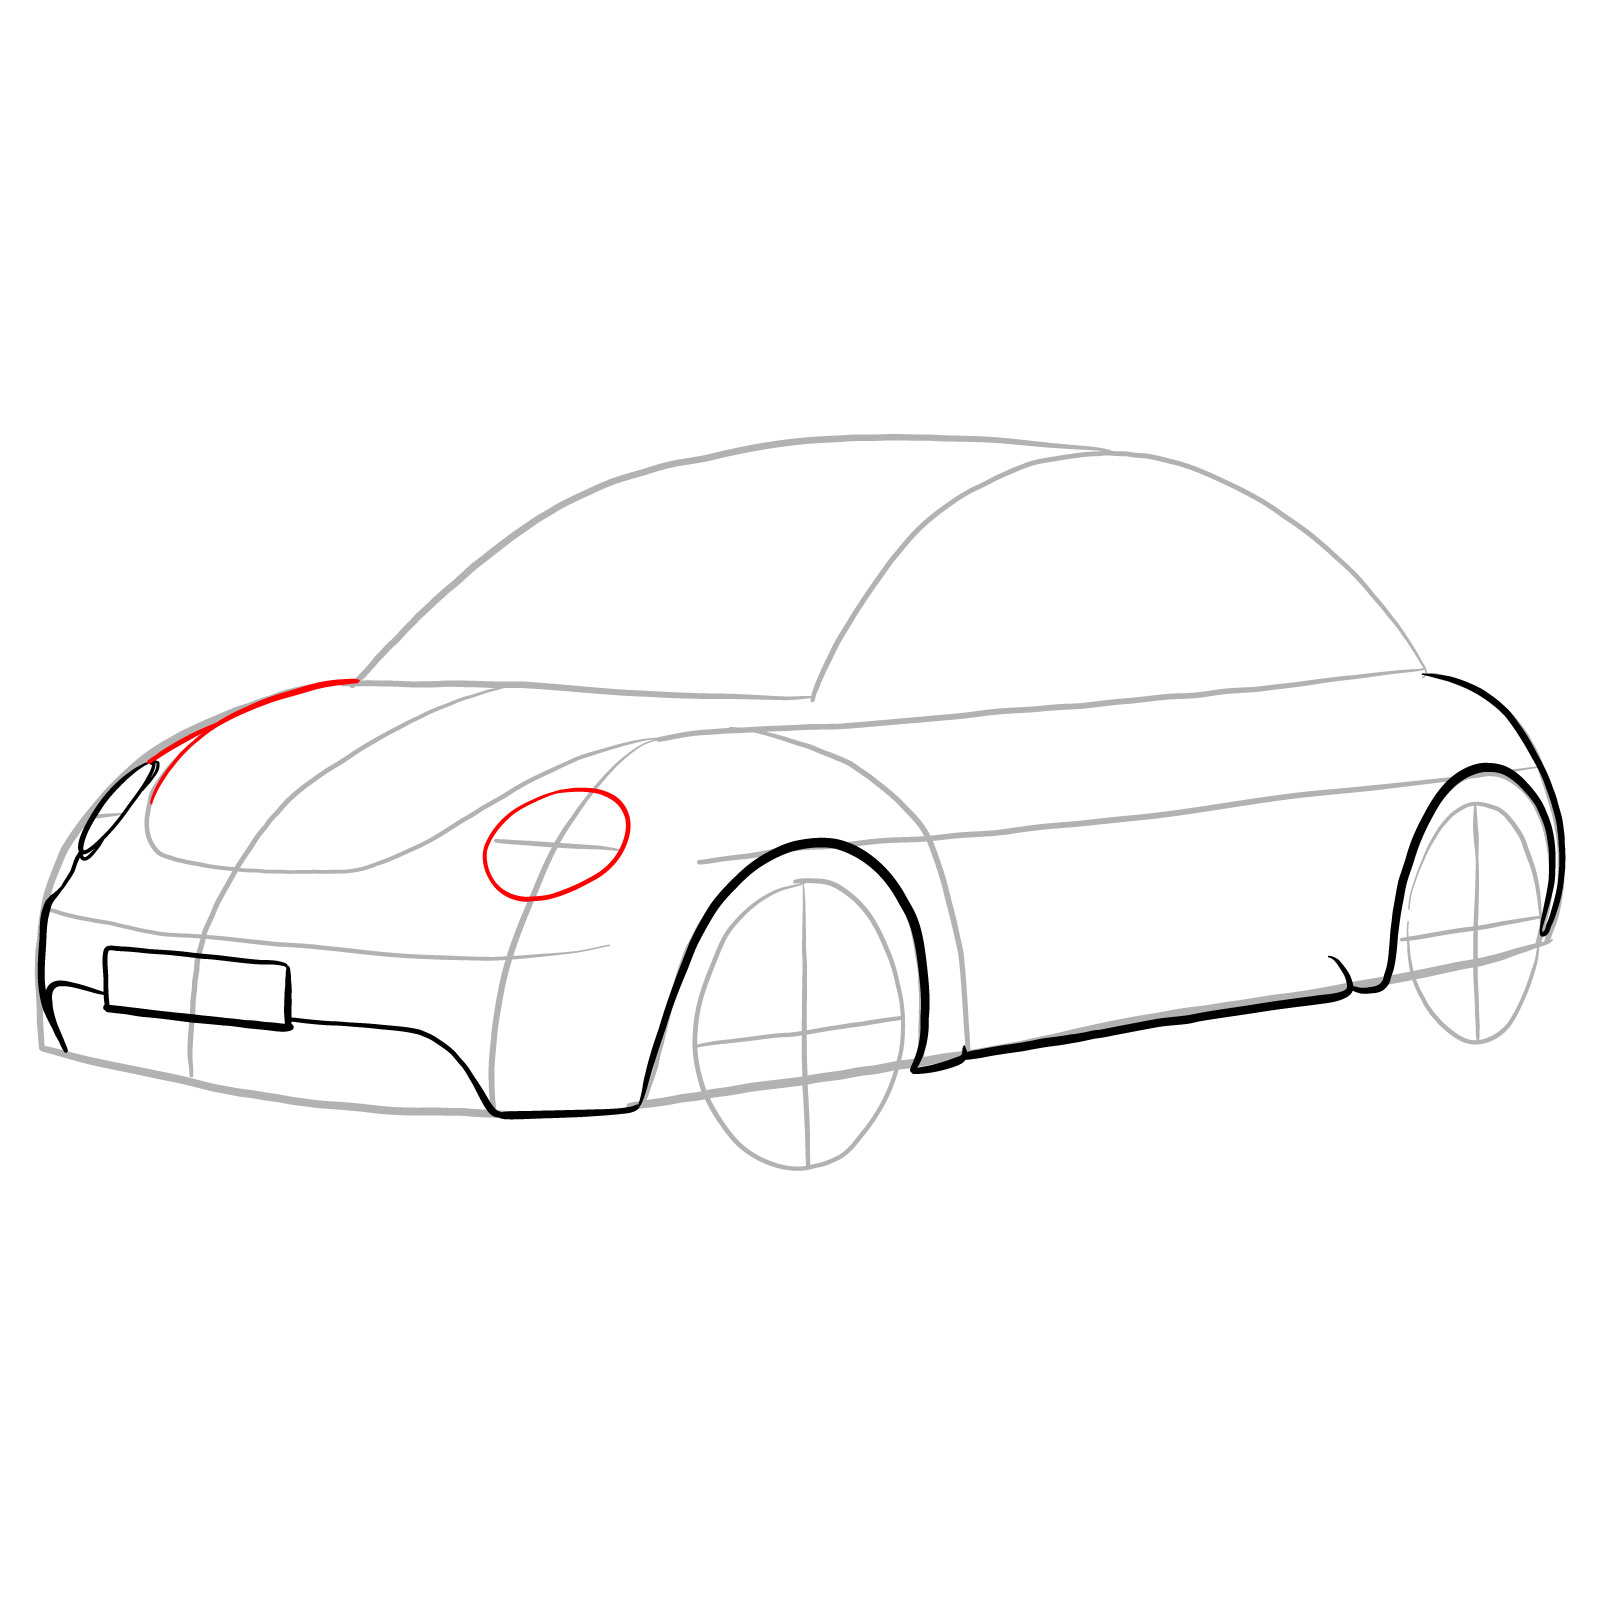 How to draw Volkswagen New Beetle - step 10